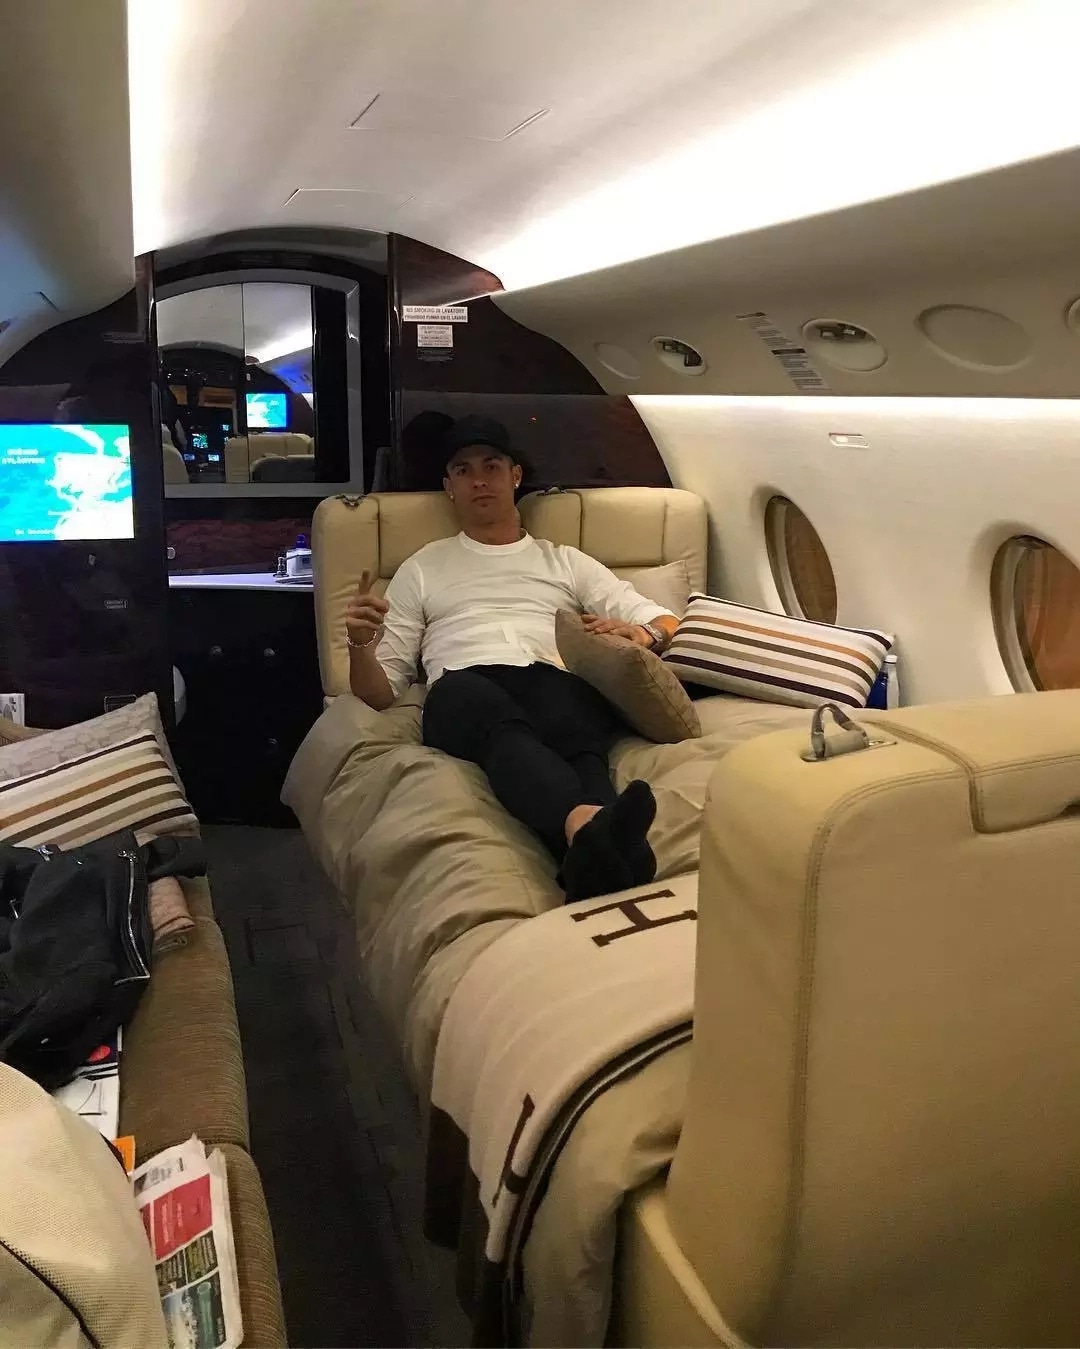 Cristiano Ronaldo looks relaxed on private jet (photos)